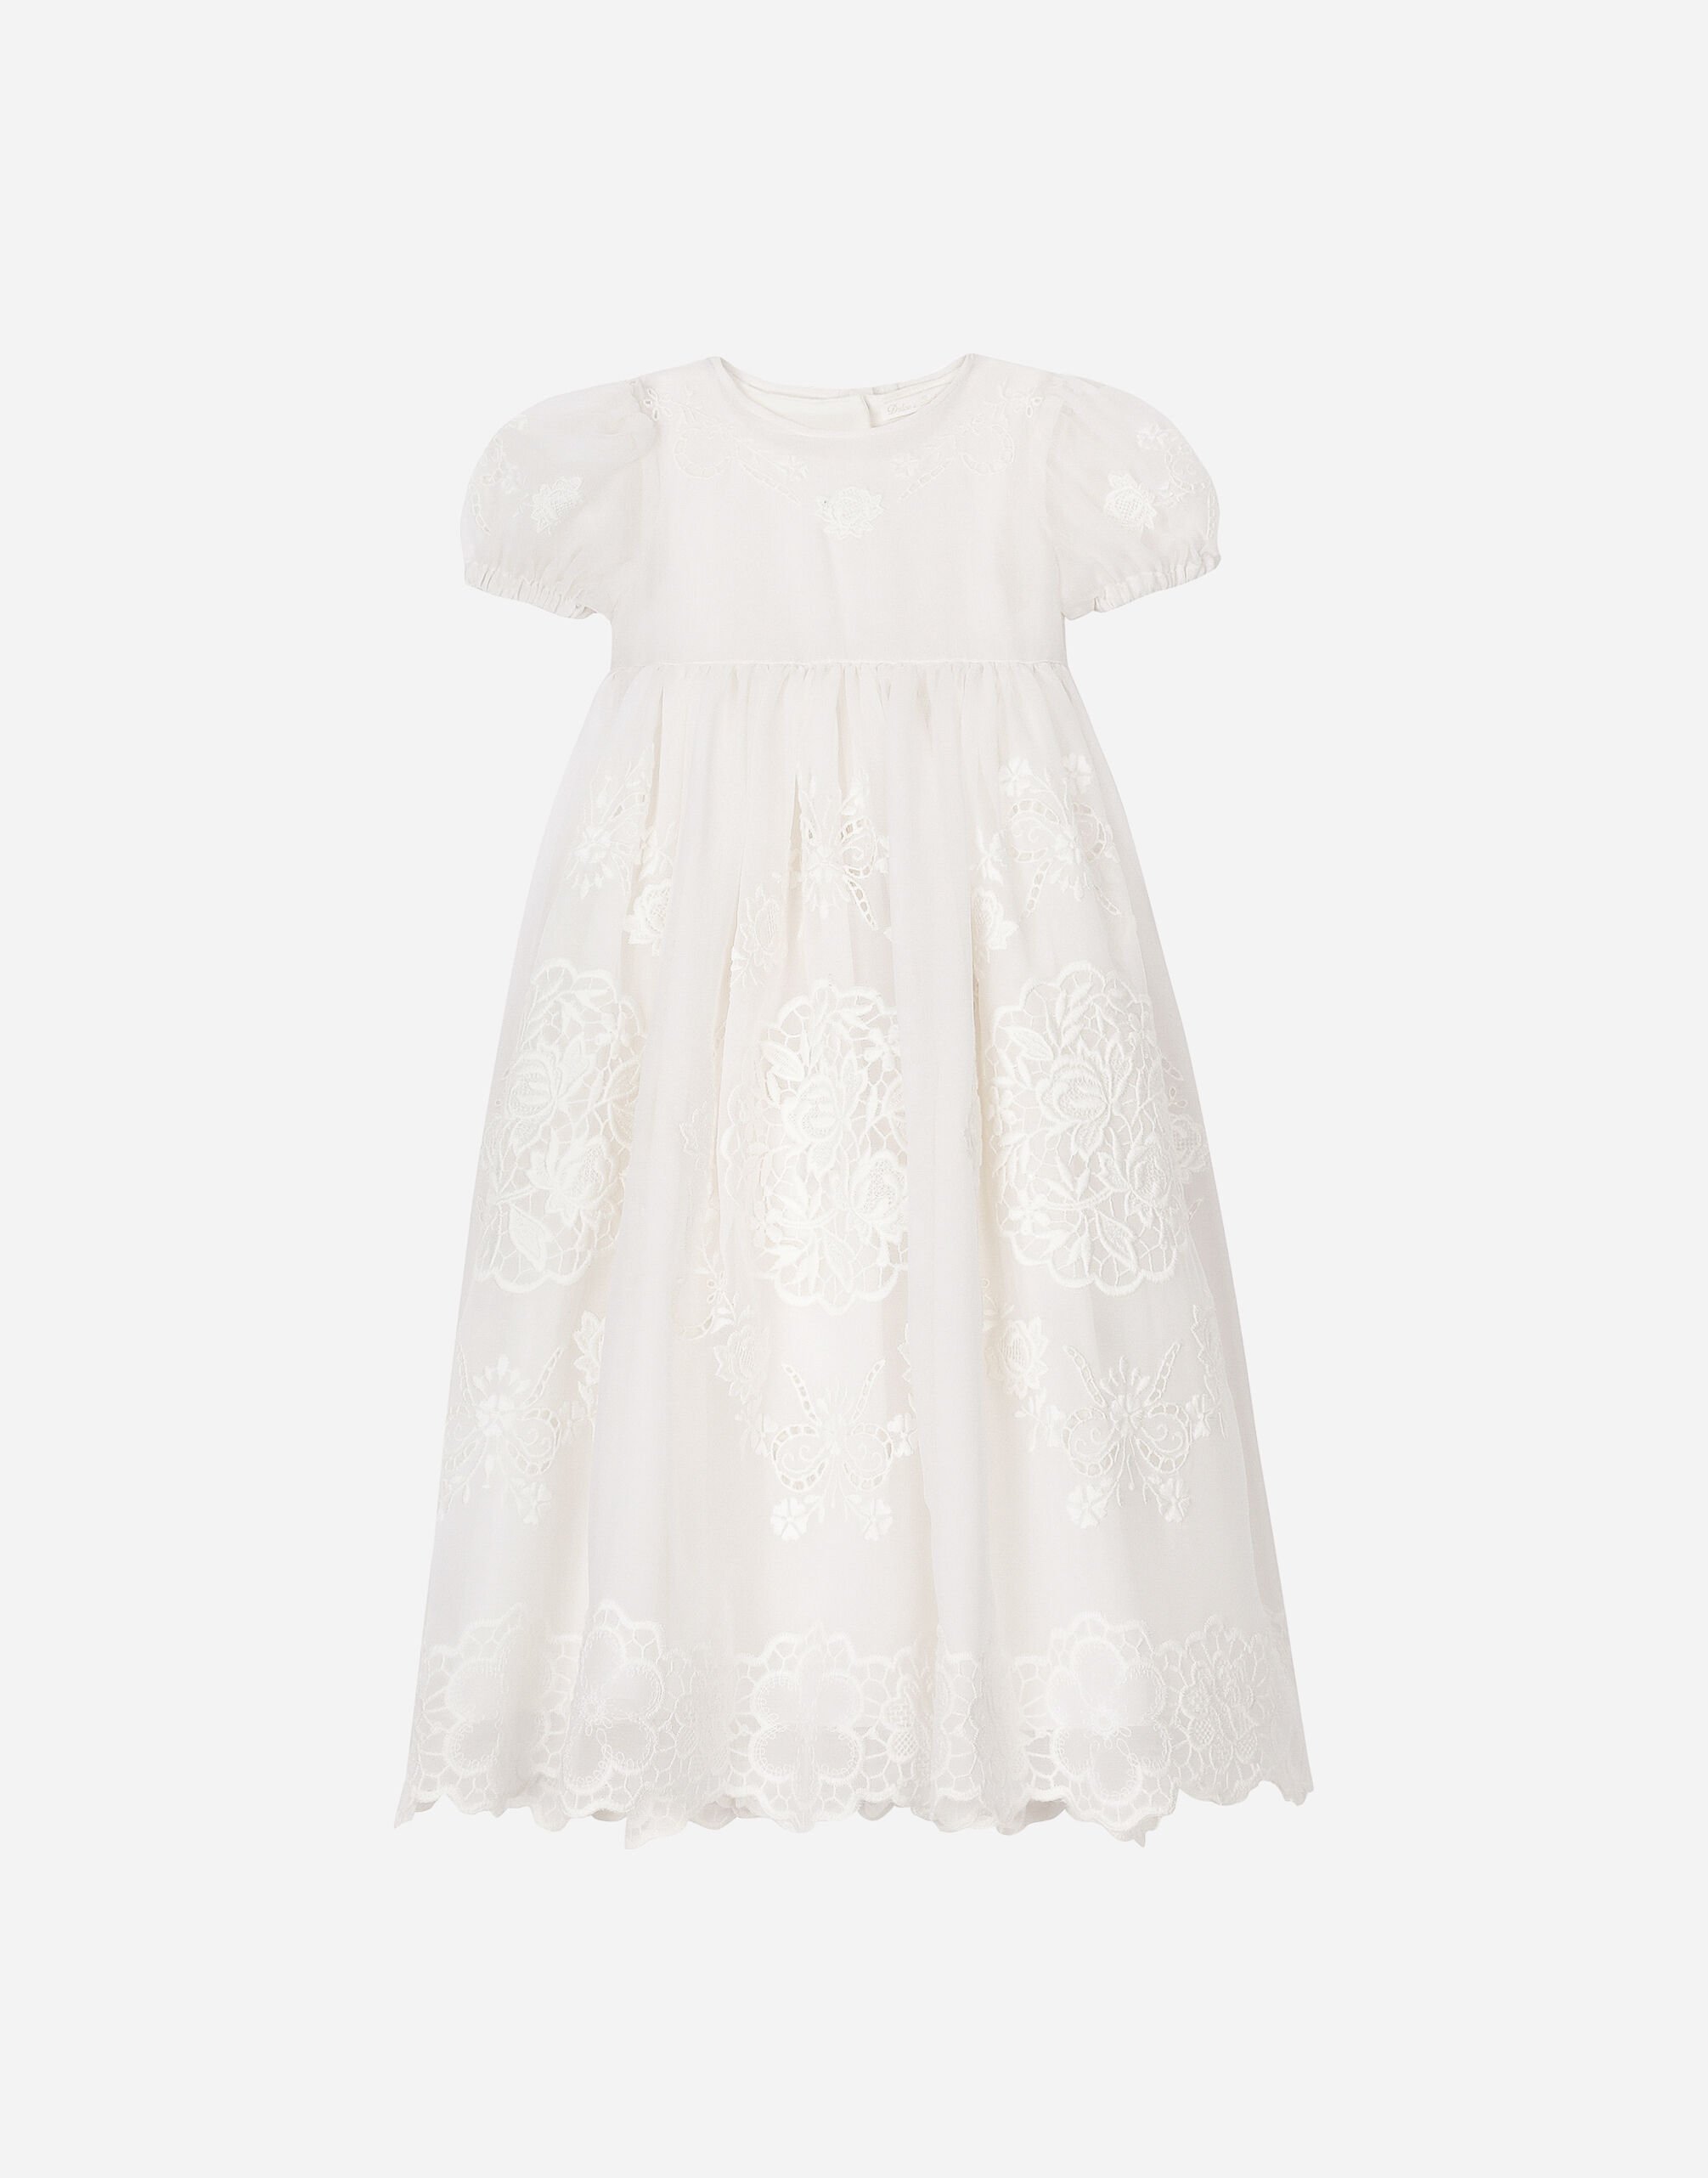 Dolce & Gabbana Empire-line embroidered chiffon christening dress with short sleeves Print L23DP2HS5QR